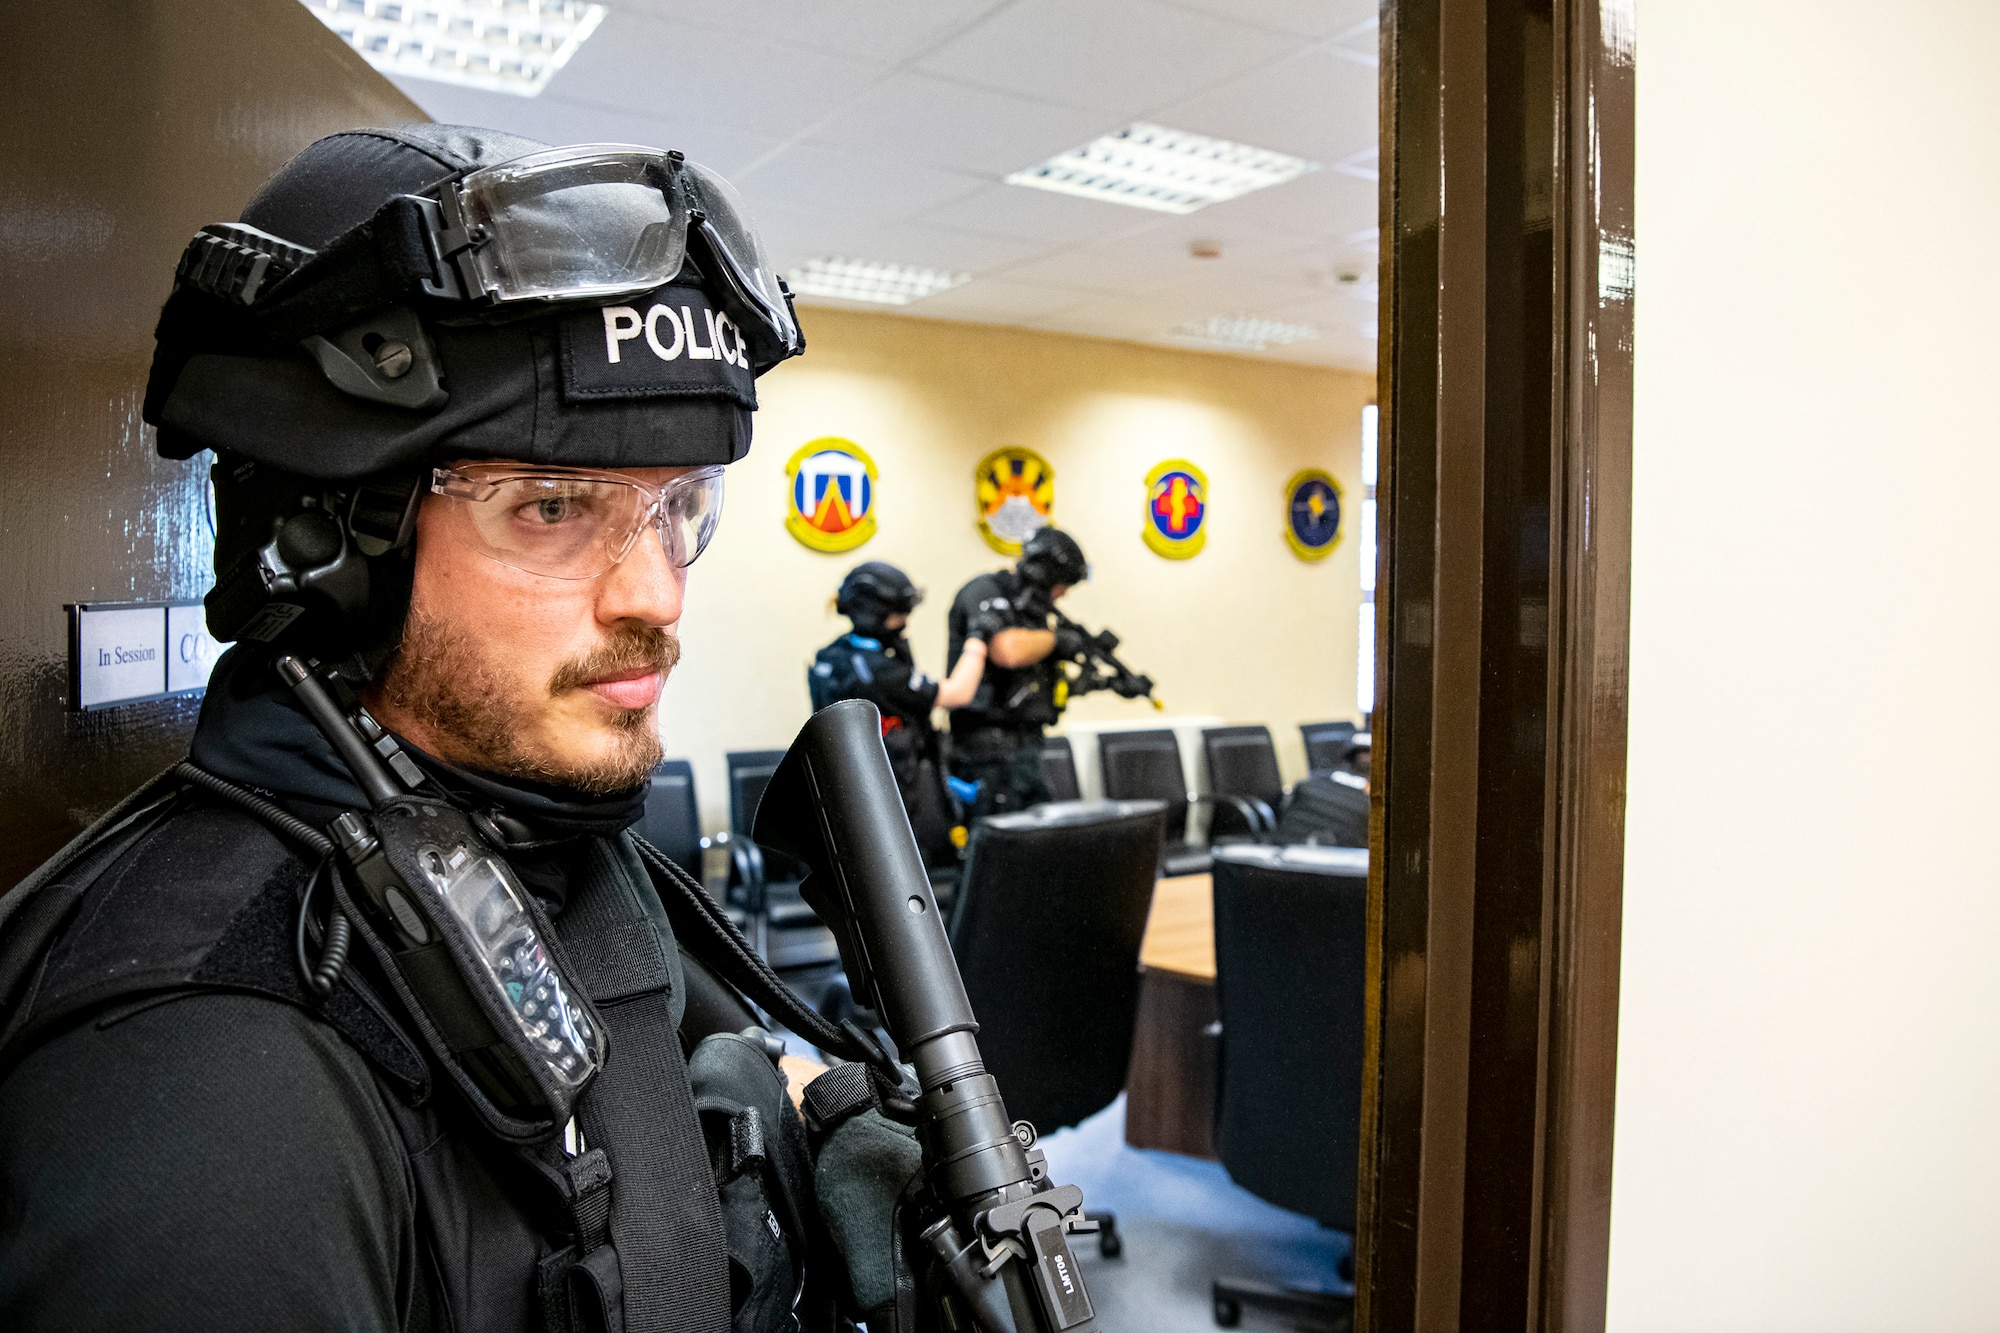 Police officers from the Northamptonshire Police Department, conduct a tri-agency active shooter response exercise at RAF Croughton, England, June 30, 2021. Airmen from the 422nd Security Forces Squadron along with police officers from the NHPD and Ministry of Defense, participated in multiple exercises to enhance their search and seizure tactics, strengthen local ties and gain rapport with their fellow officers. (U.S. Air Force photo by Senior Airman Eugene Oliver)